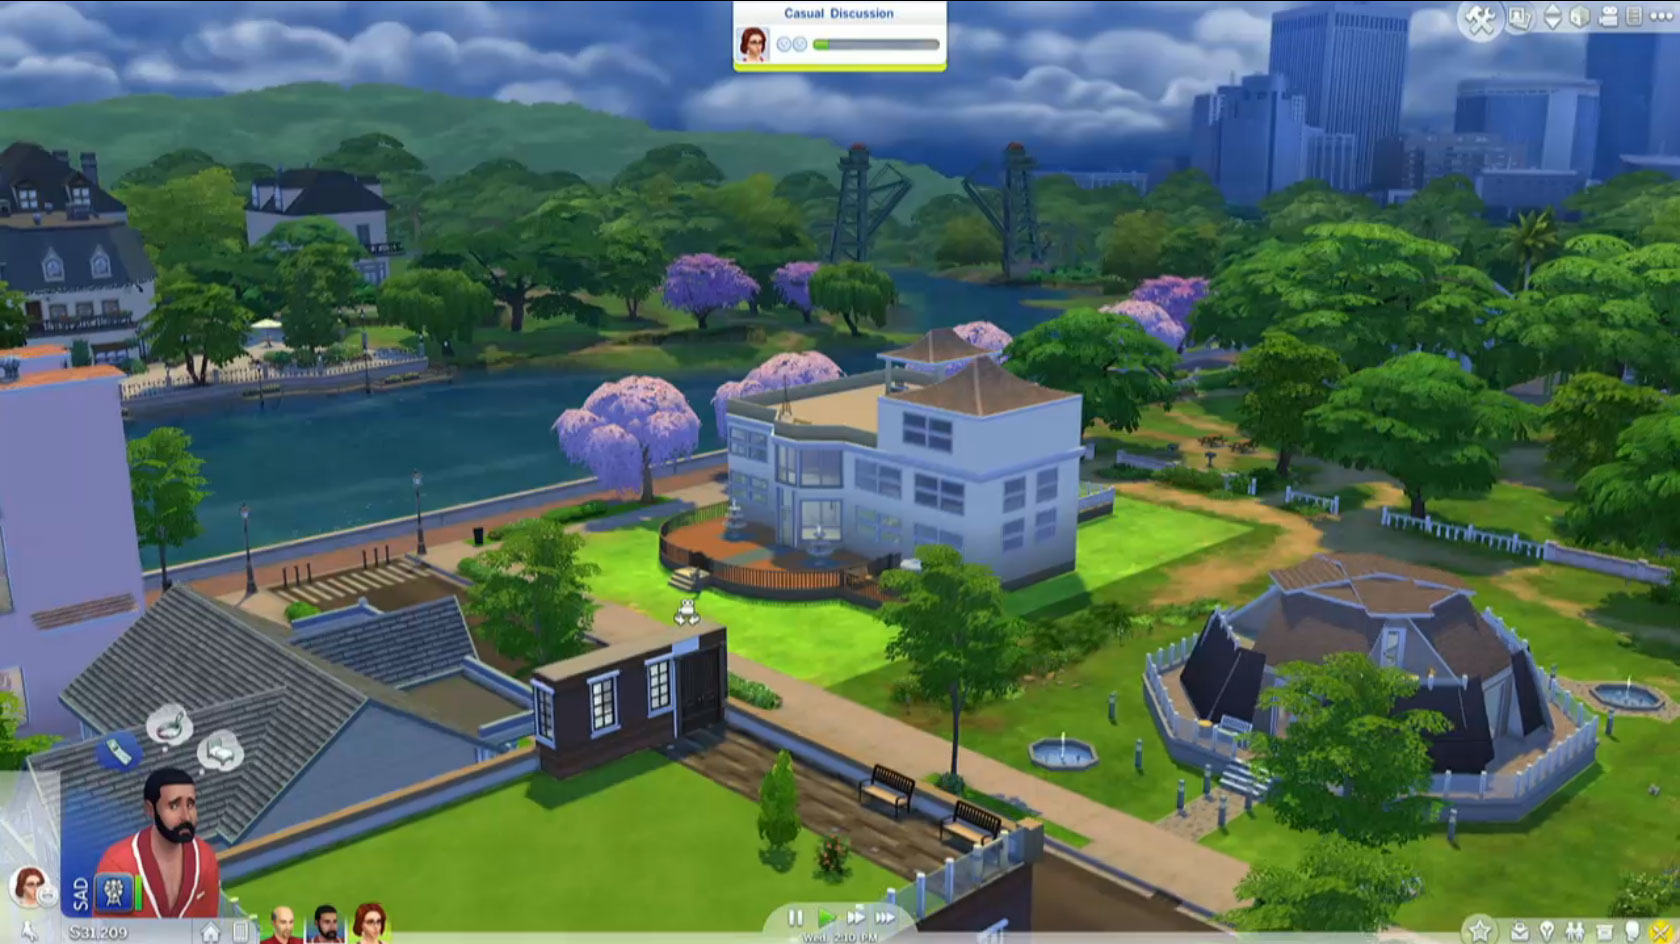 play sims freeplay on mac without emulator